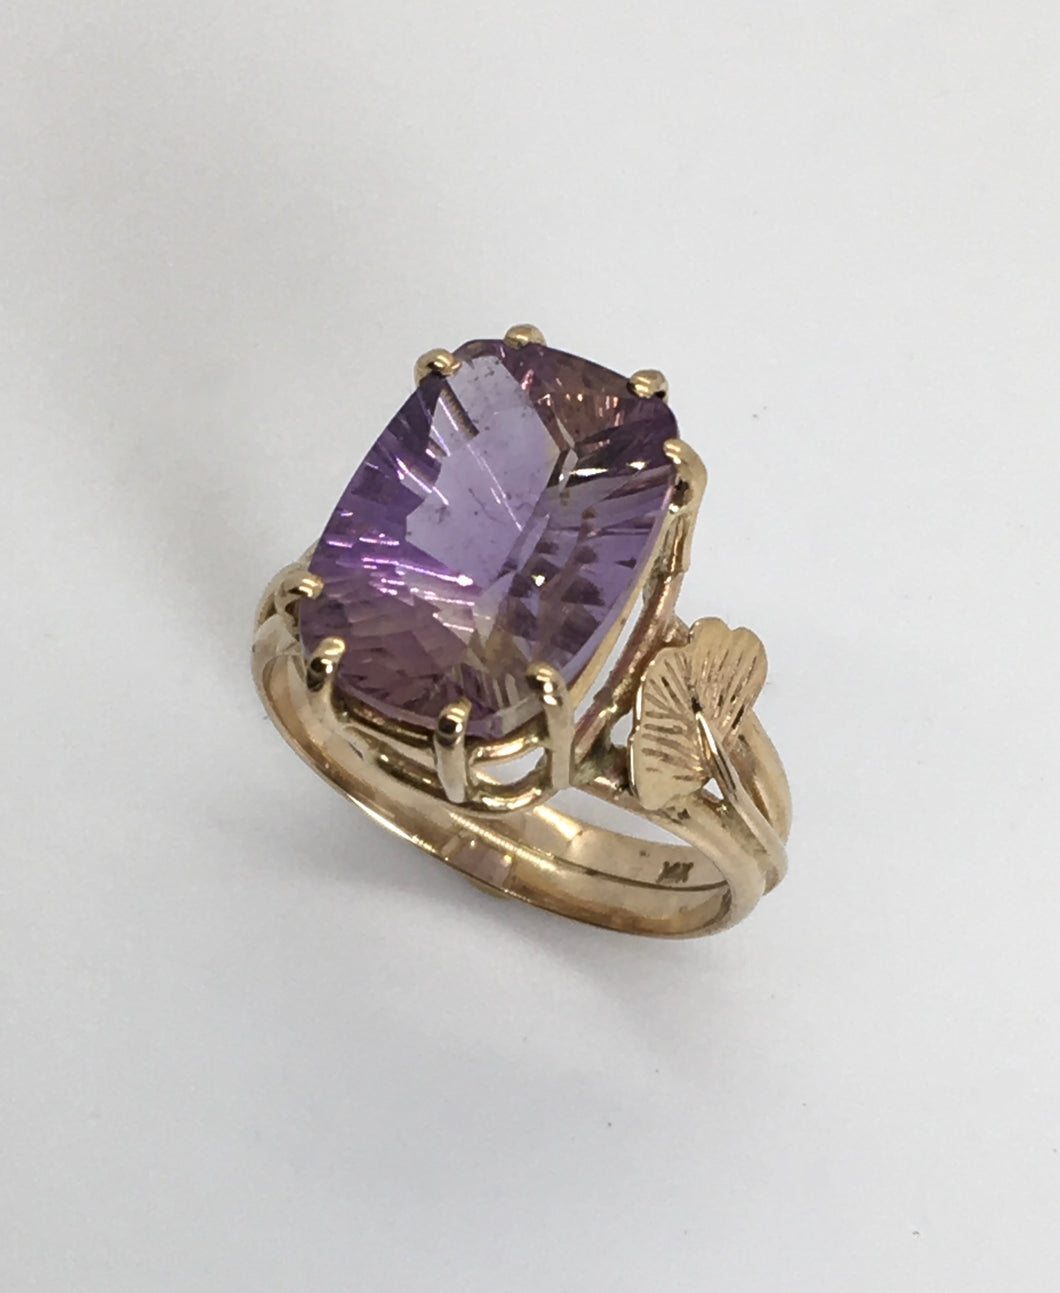 Ametrine Ring with Ginkgo Leaves